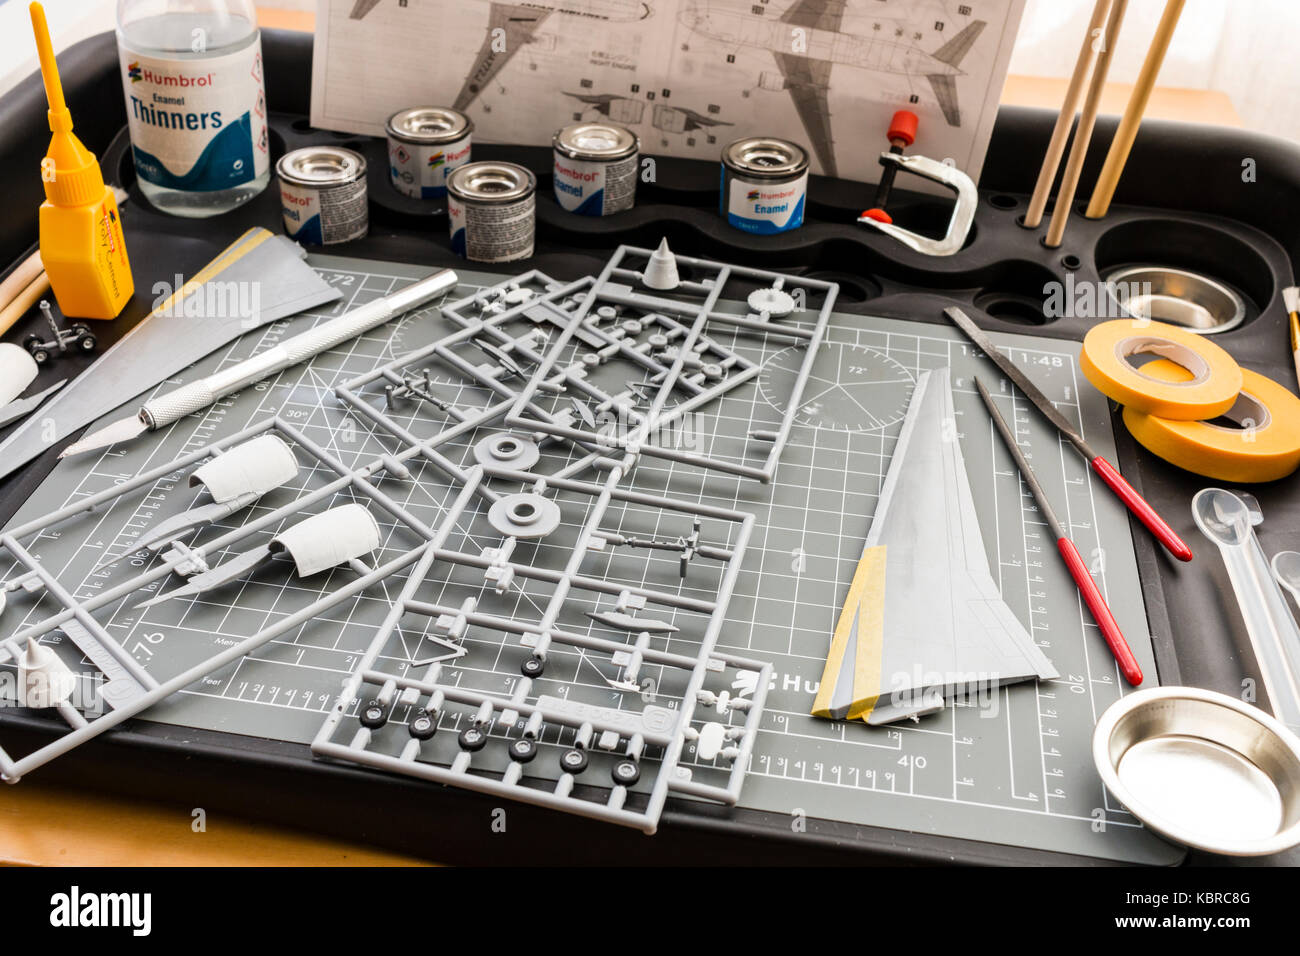 England. Modelling station with cutting mat, paint pots, tools, maskign tape. Spur of airplane parts, and plane wing partly masked for painting. Stock Photo